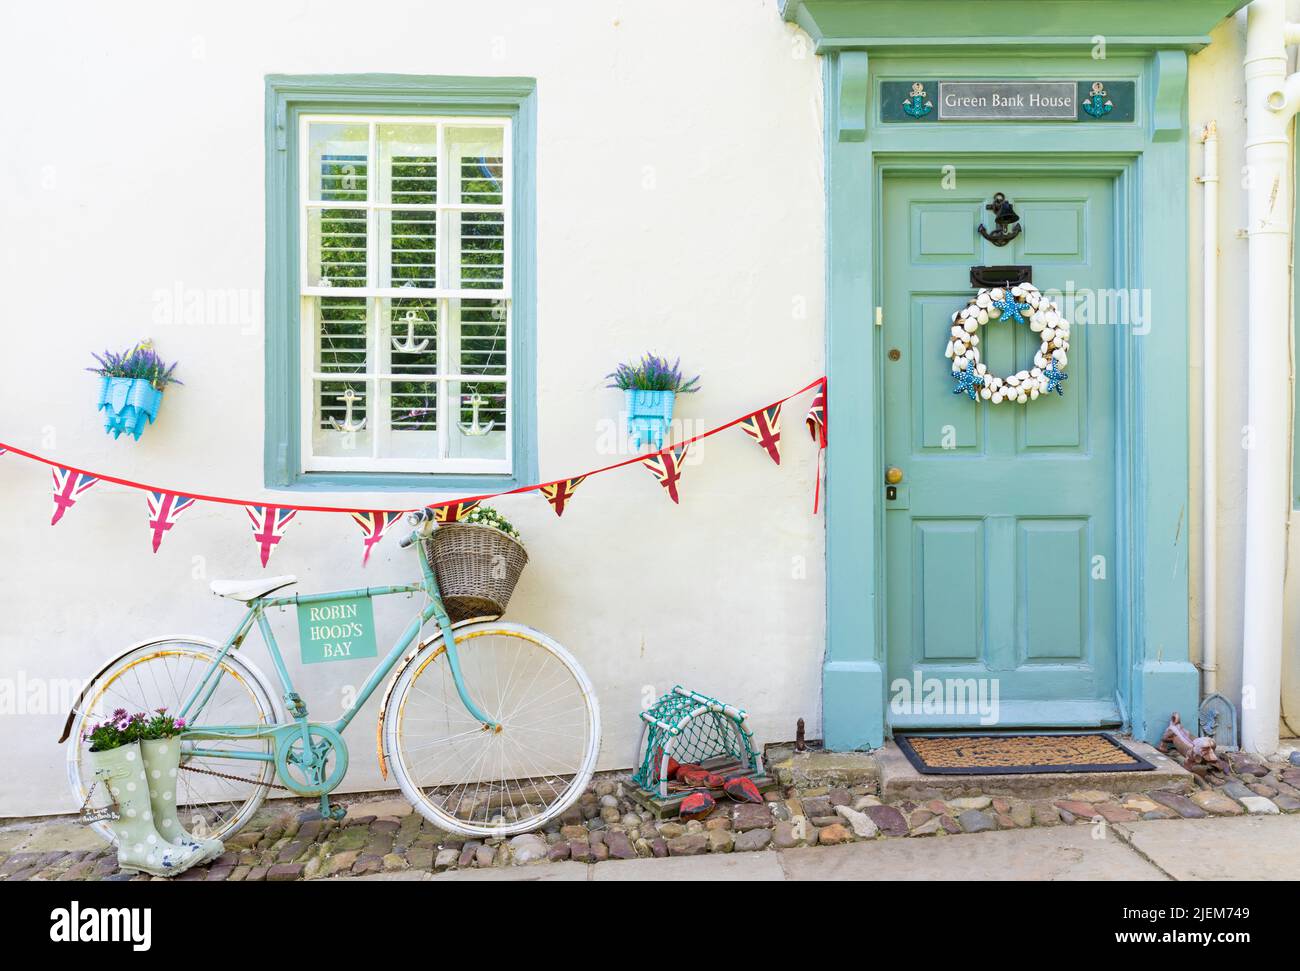 Robin Hood's Bay Yorkshire - Pretty Green Bank house decorated with bunting and a green bicycle and wreath on the door Robin Hood's Bay Yorkshire UK Stock Photo